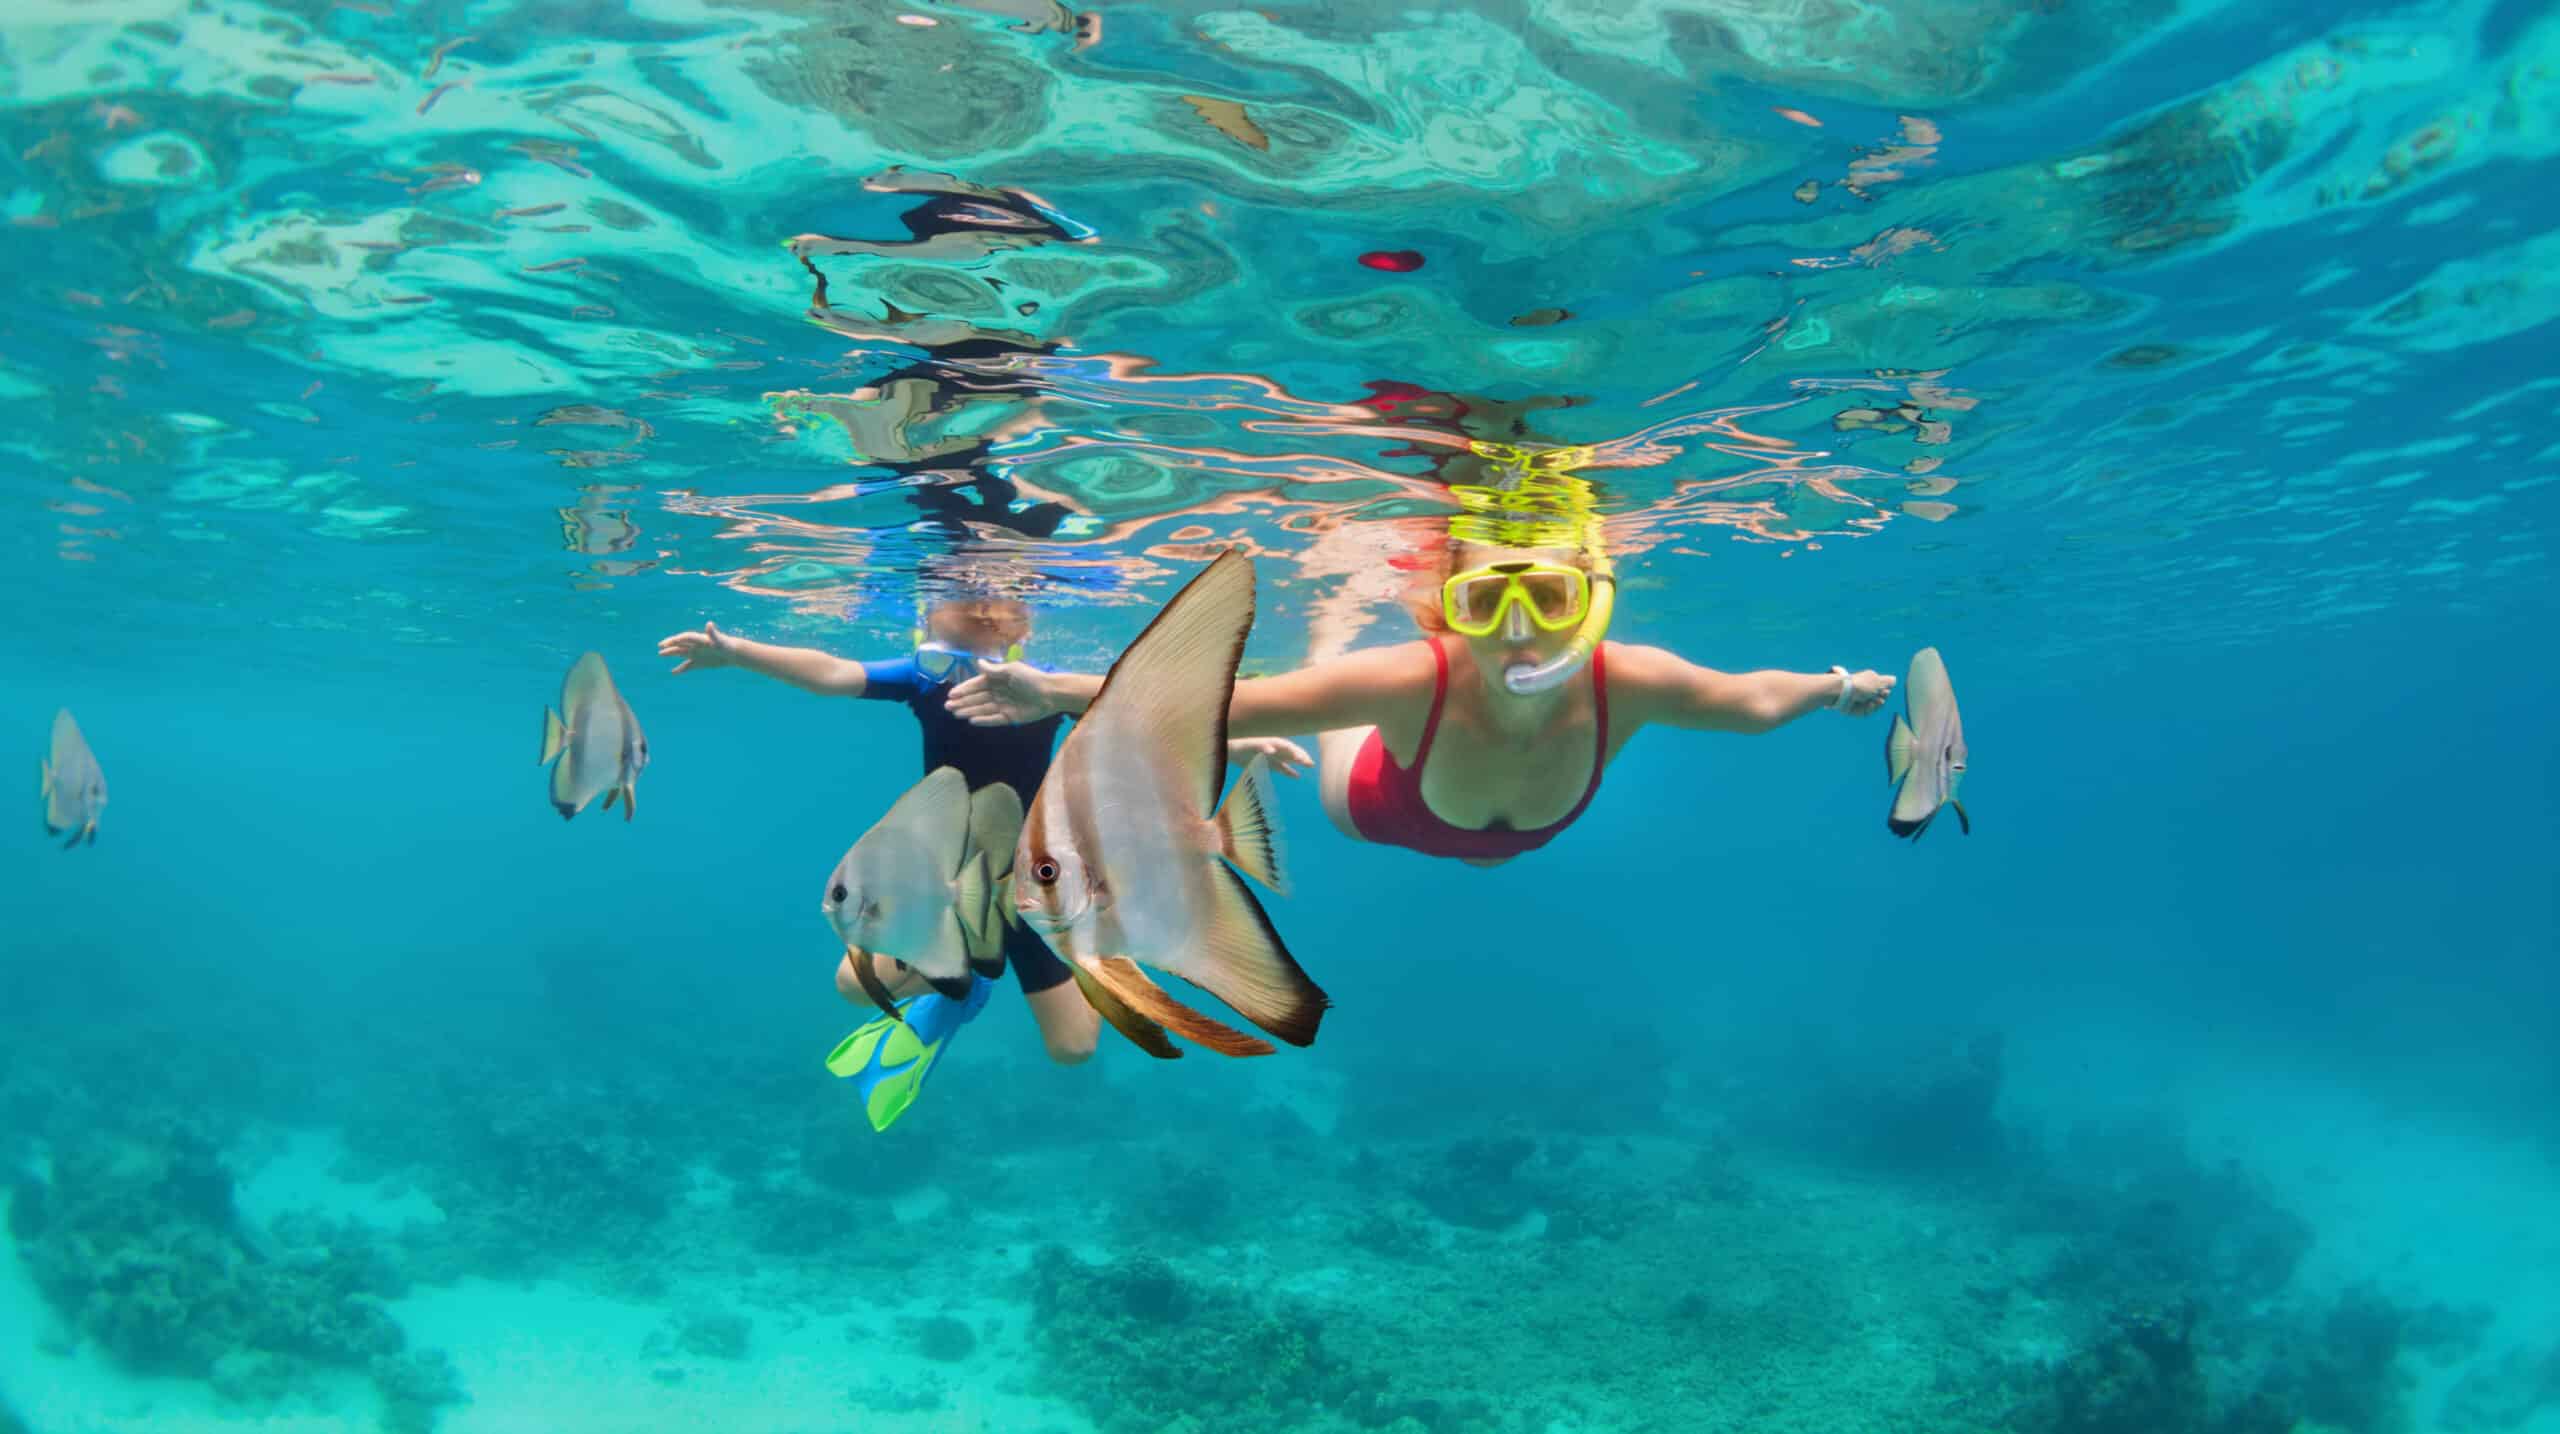 Snorkeling Underwater with Tropical Fishes